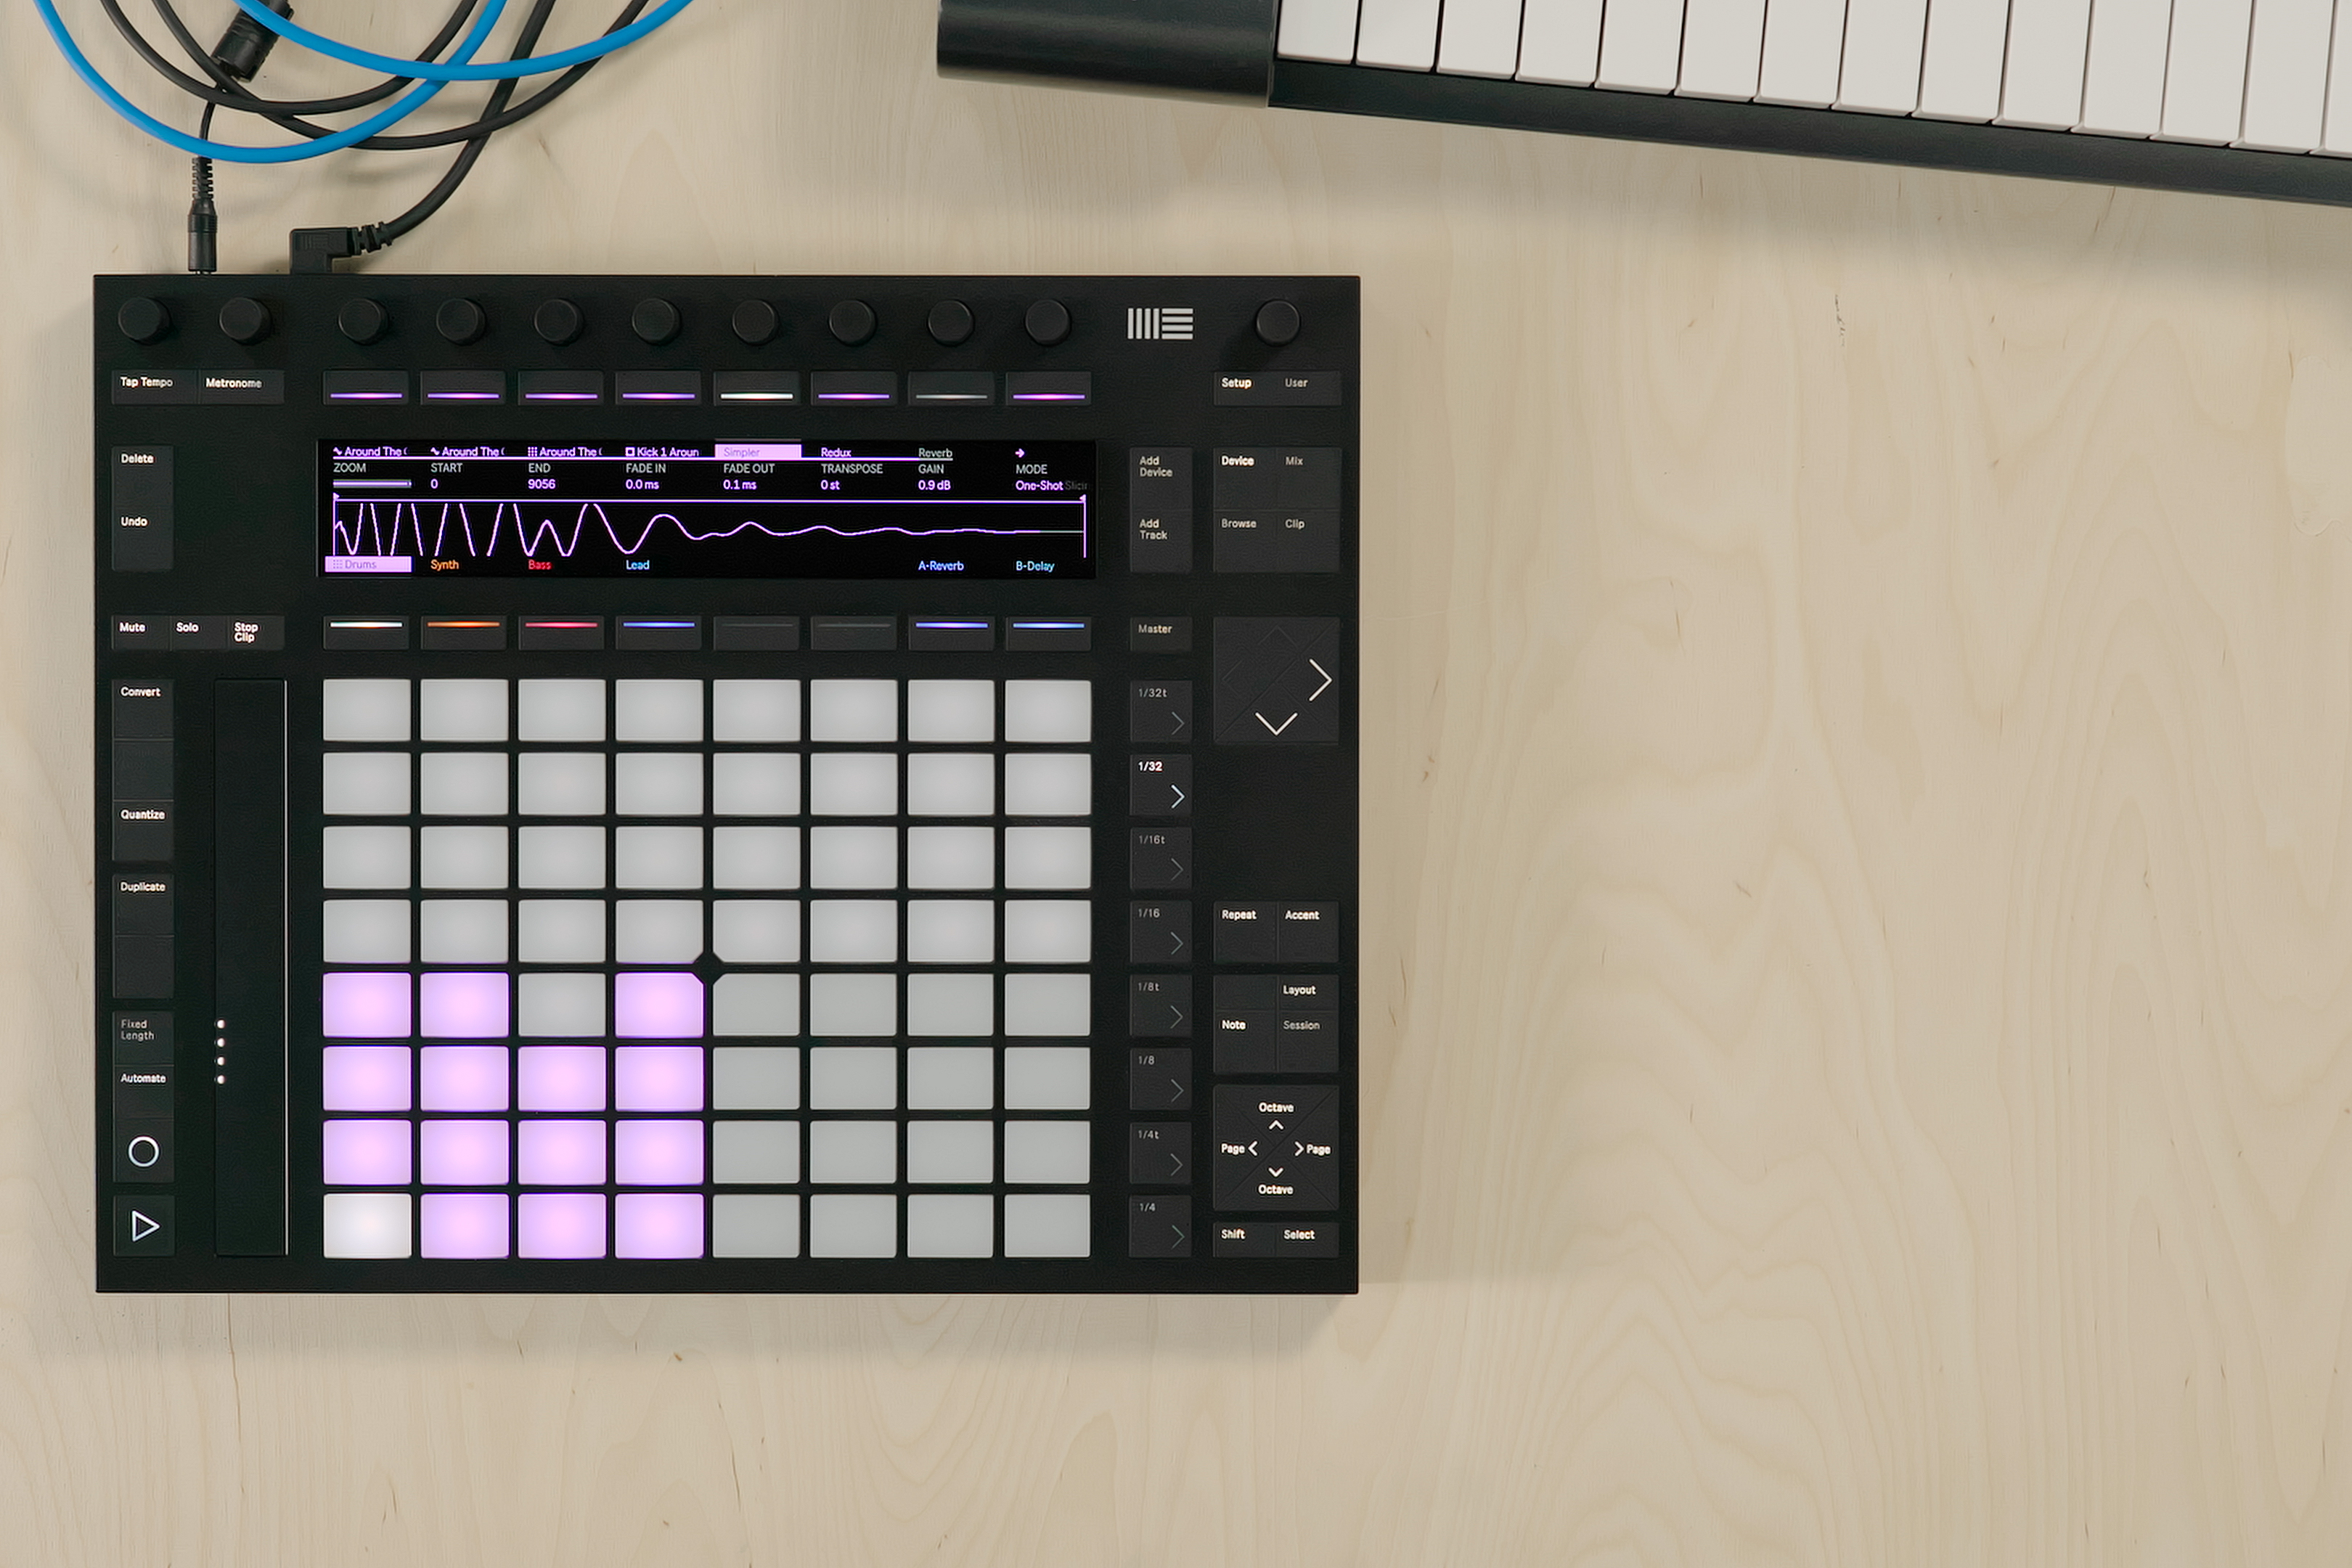 Learn more about Ableton Push | Ableton